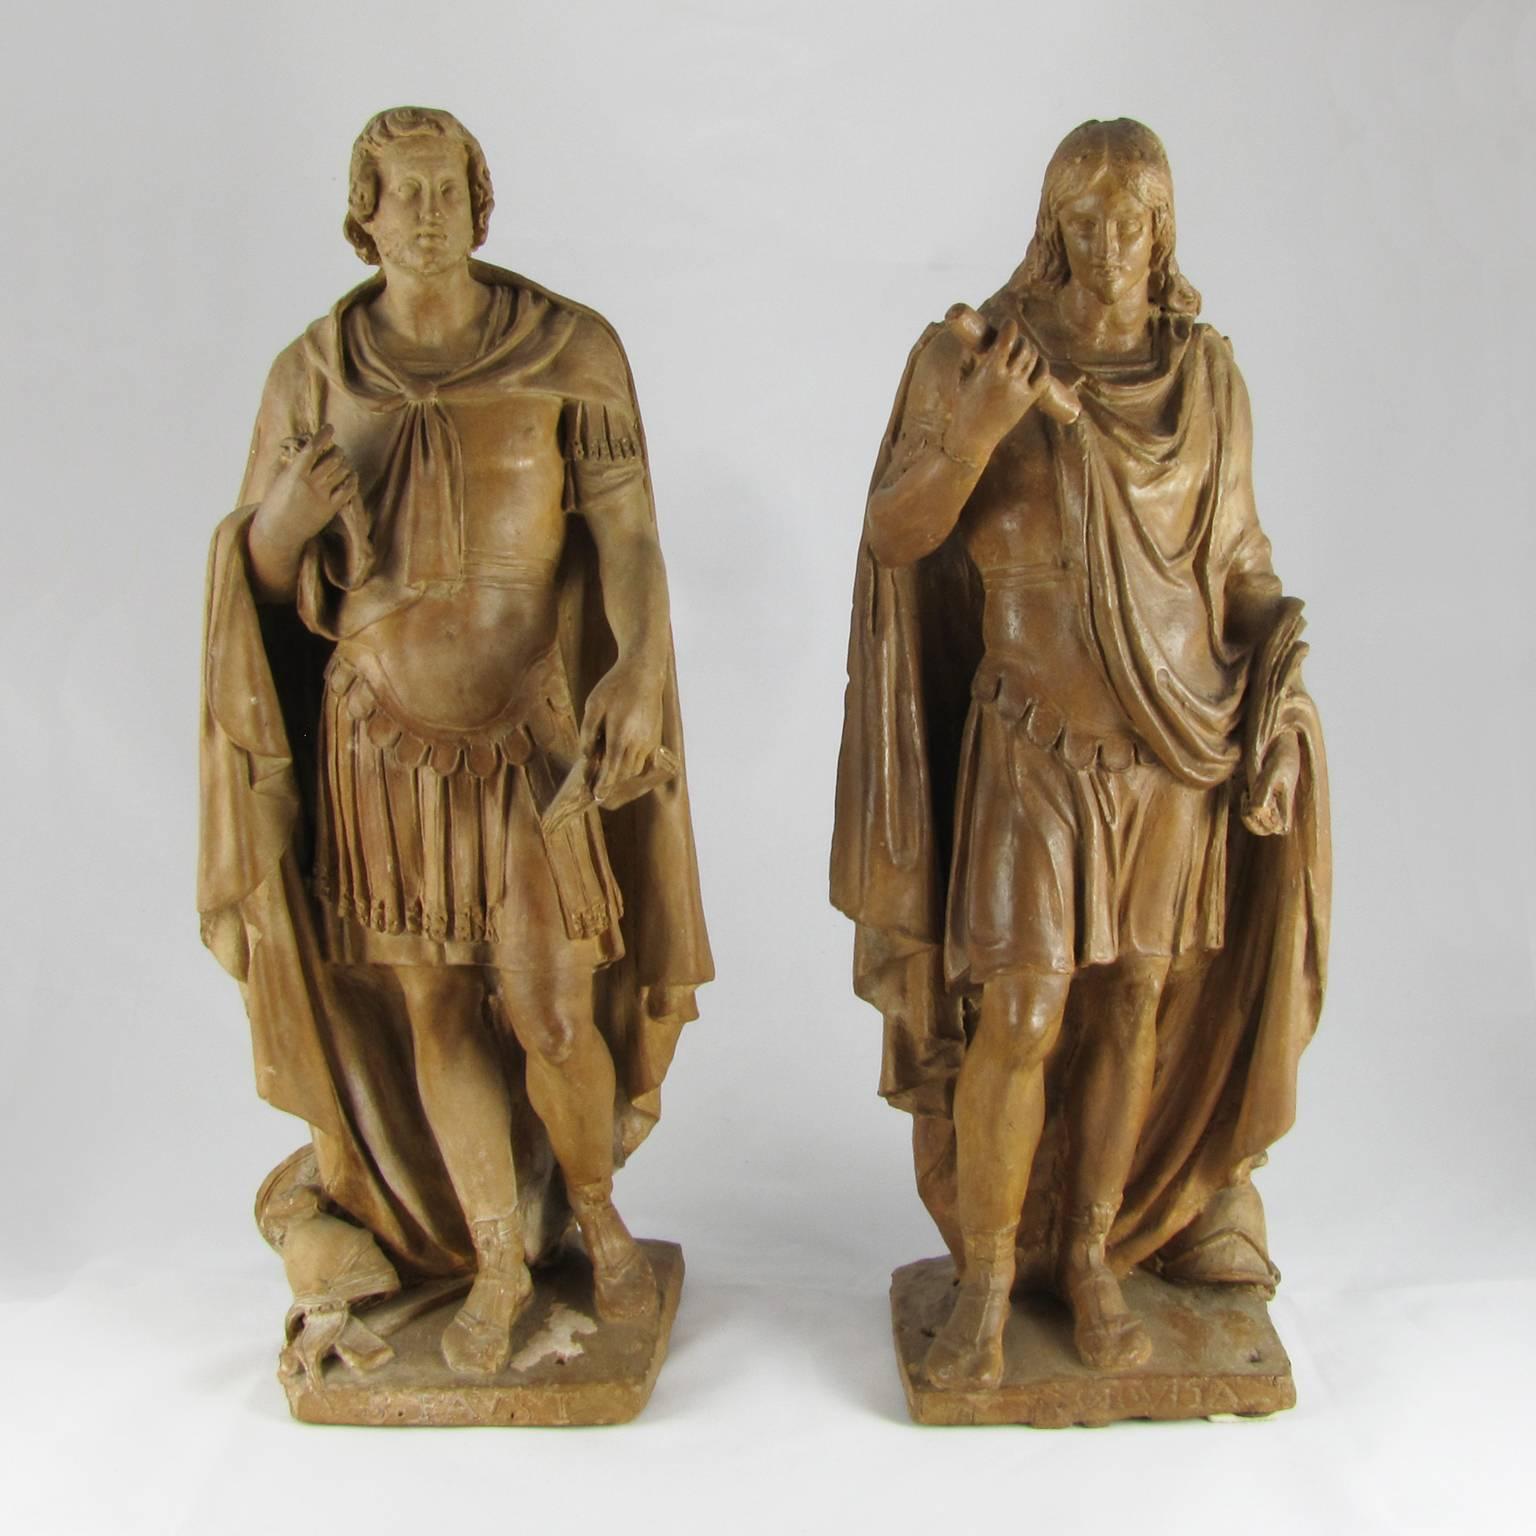 A beautiful pair of terracotta sculptures depicting the two saints Faustinus and Jovita, Christian martyrs under Hadrian. They are patron saints of Brescia, Lombardy.
Italian manufactory from the early 18th century
Unglazed terracotta with a